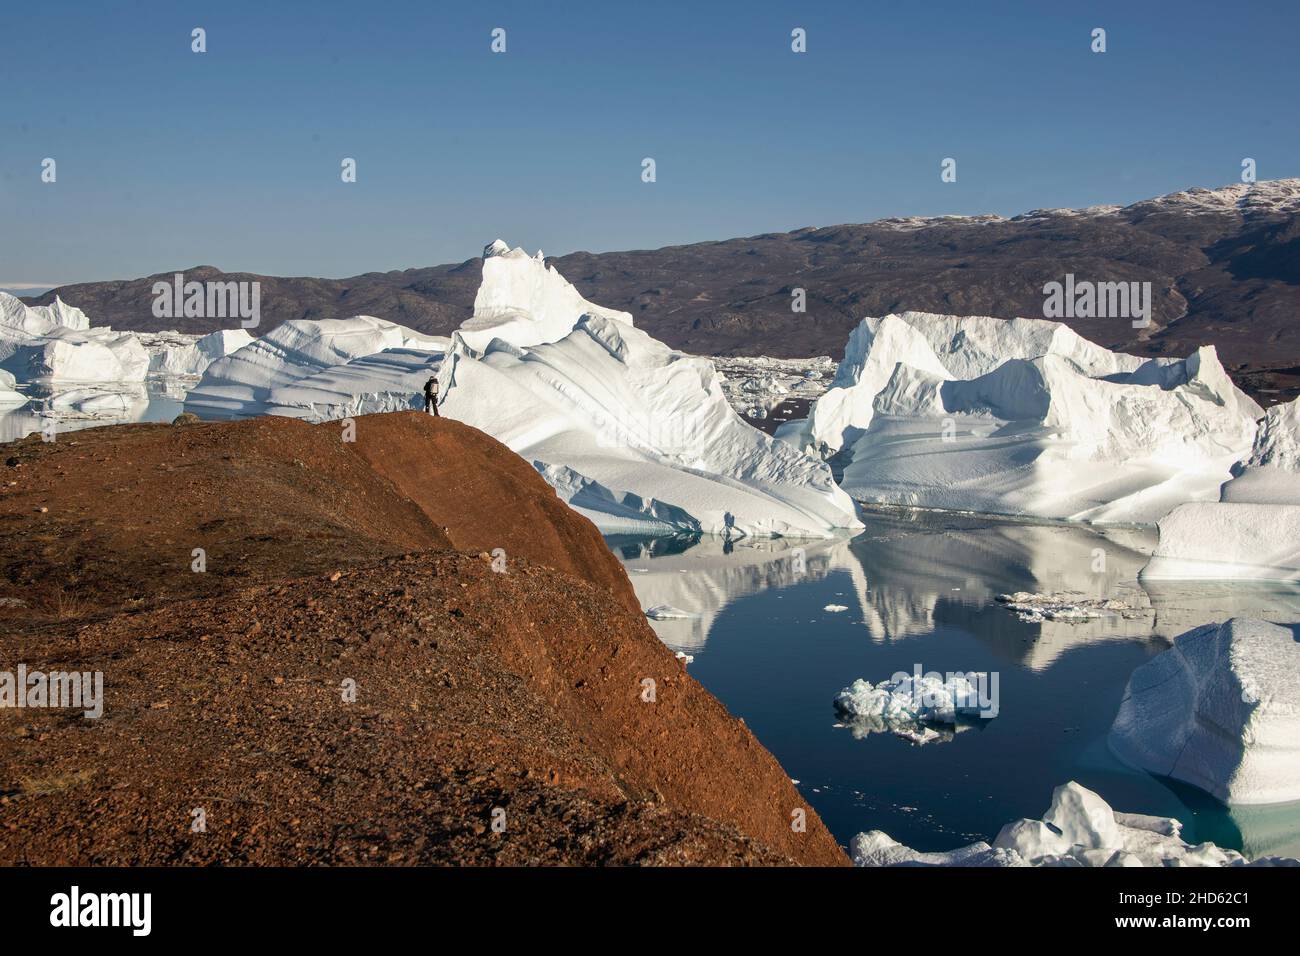 Tiny figure overlooking an ice jam from Rode O, Rodefjord with Milne Land, Scoresby Sund, East Greenland Stock Photo